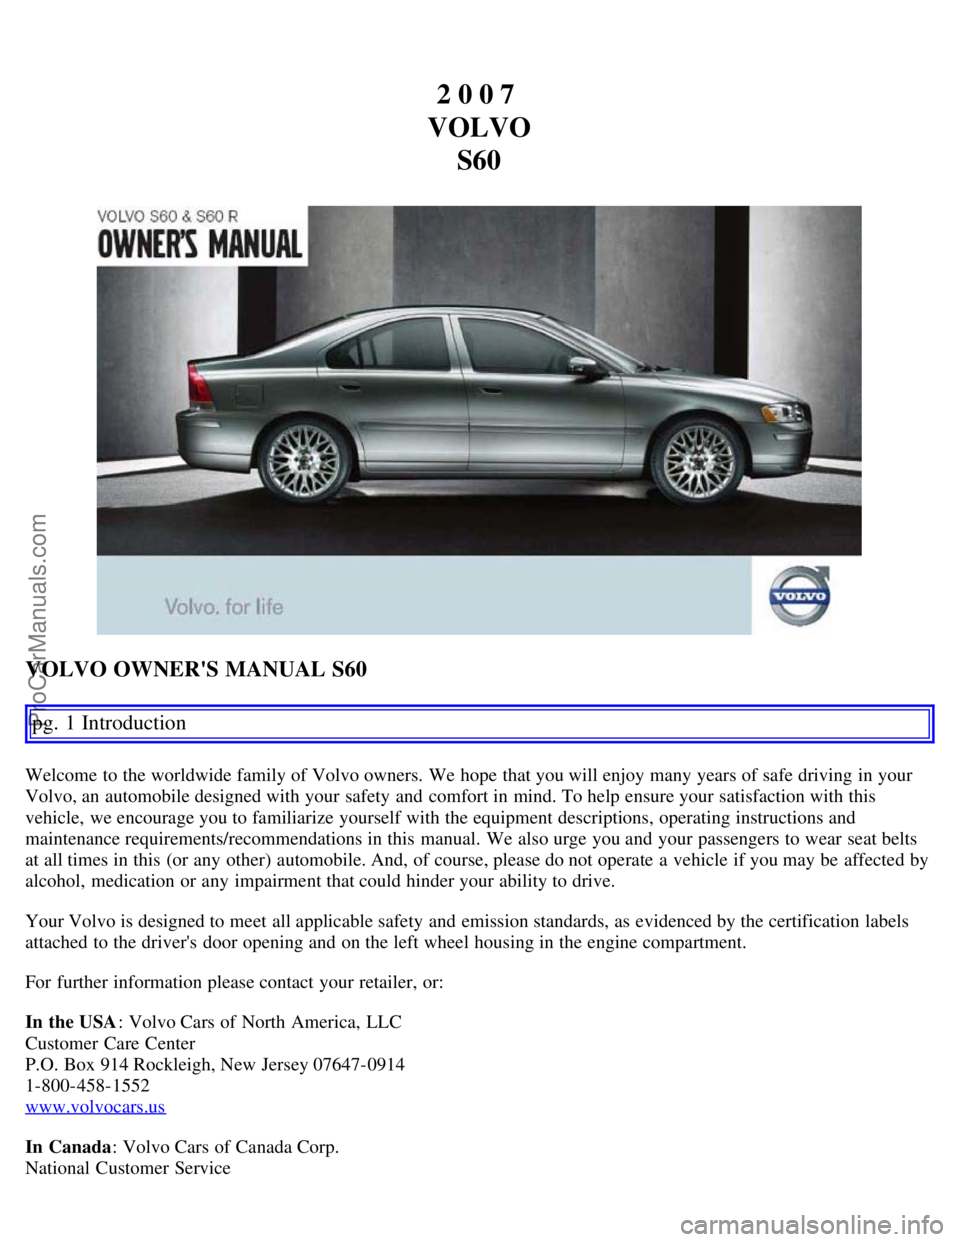 VOLVO S60 2007  Owners Manual 2 0 0 7 
VOLVO S60
VOLVO OWNERS MANUAL S60
pg. 1 Introduction
Welcome to the worldwide family of Volvo owners. We hope  that you will enjoy many years of safe driving in your
Volvo, an  automobile de